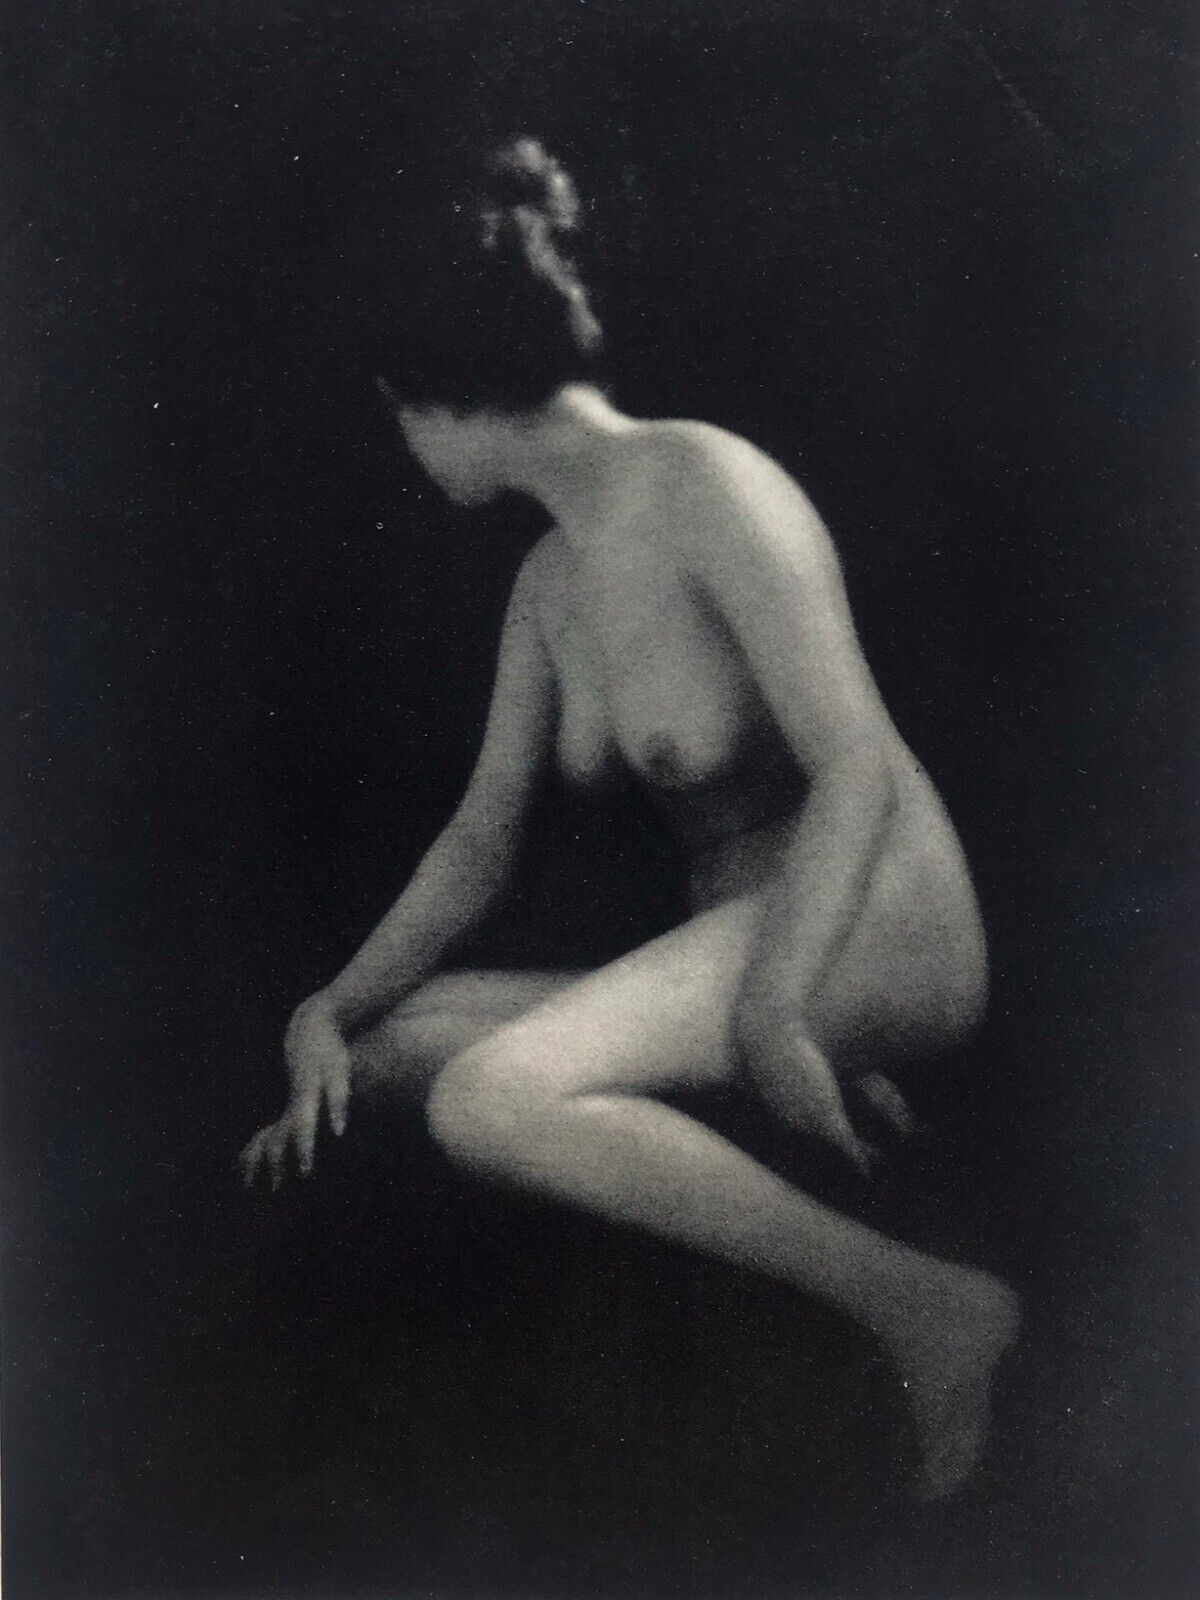 Moody nude study 1923 by Marian Lewis 1878-1942